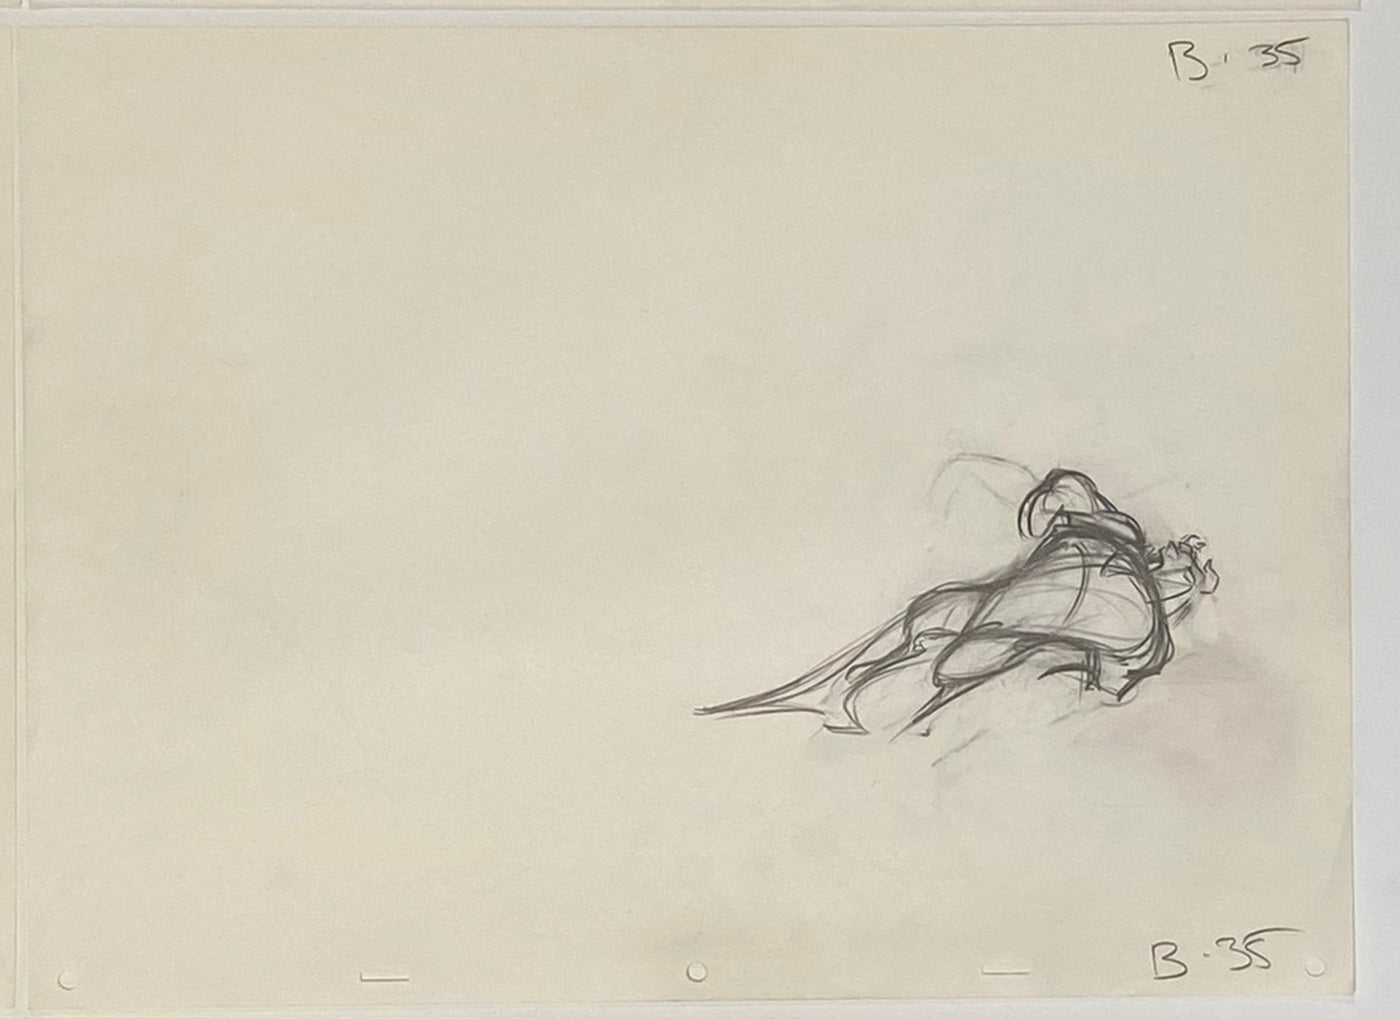 Original Walt Disney Sequence of 8 Production Drawings from Beauty and the Beast featuring Beast